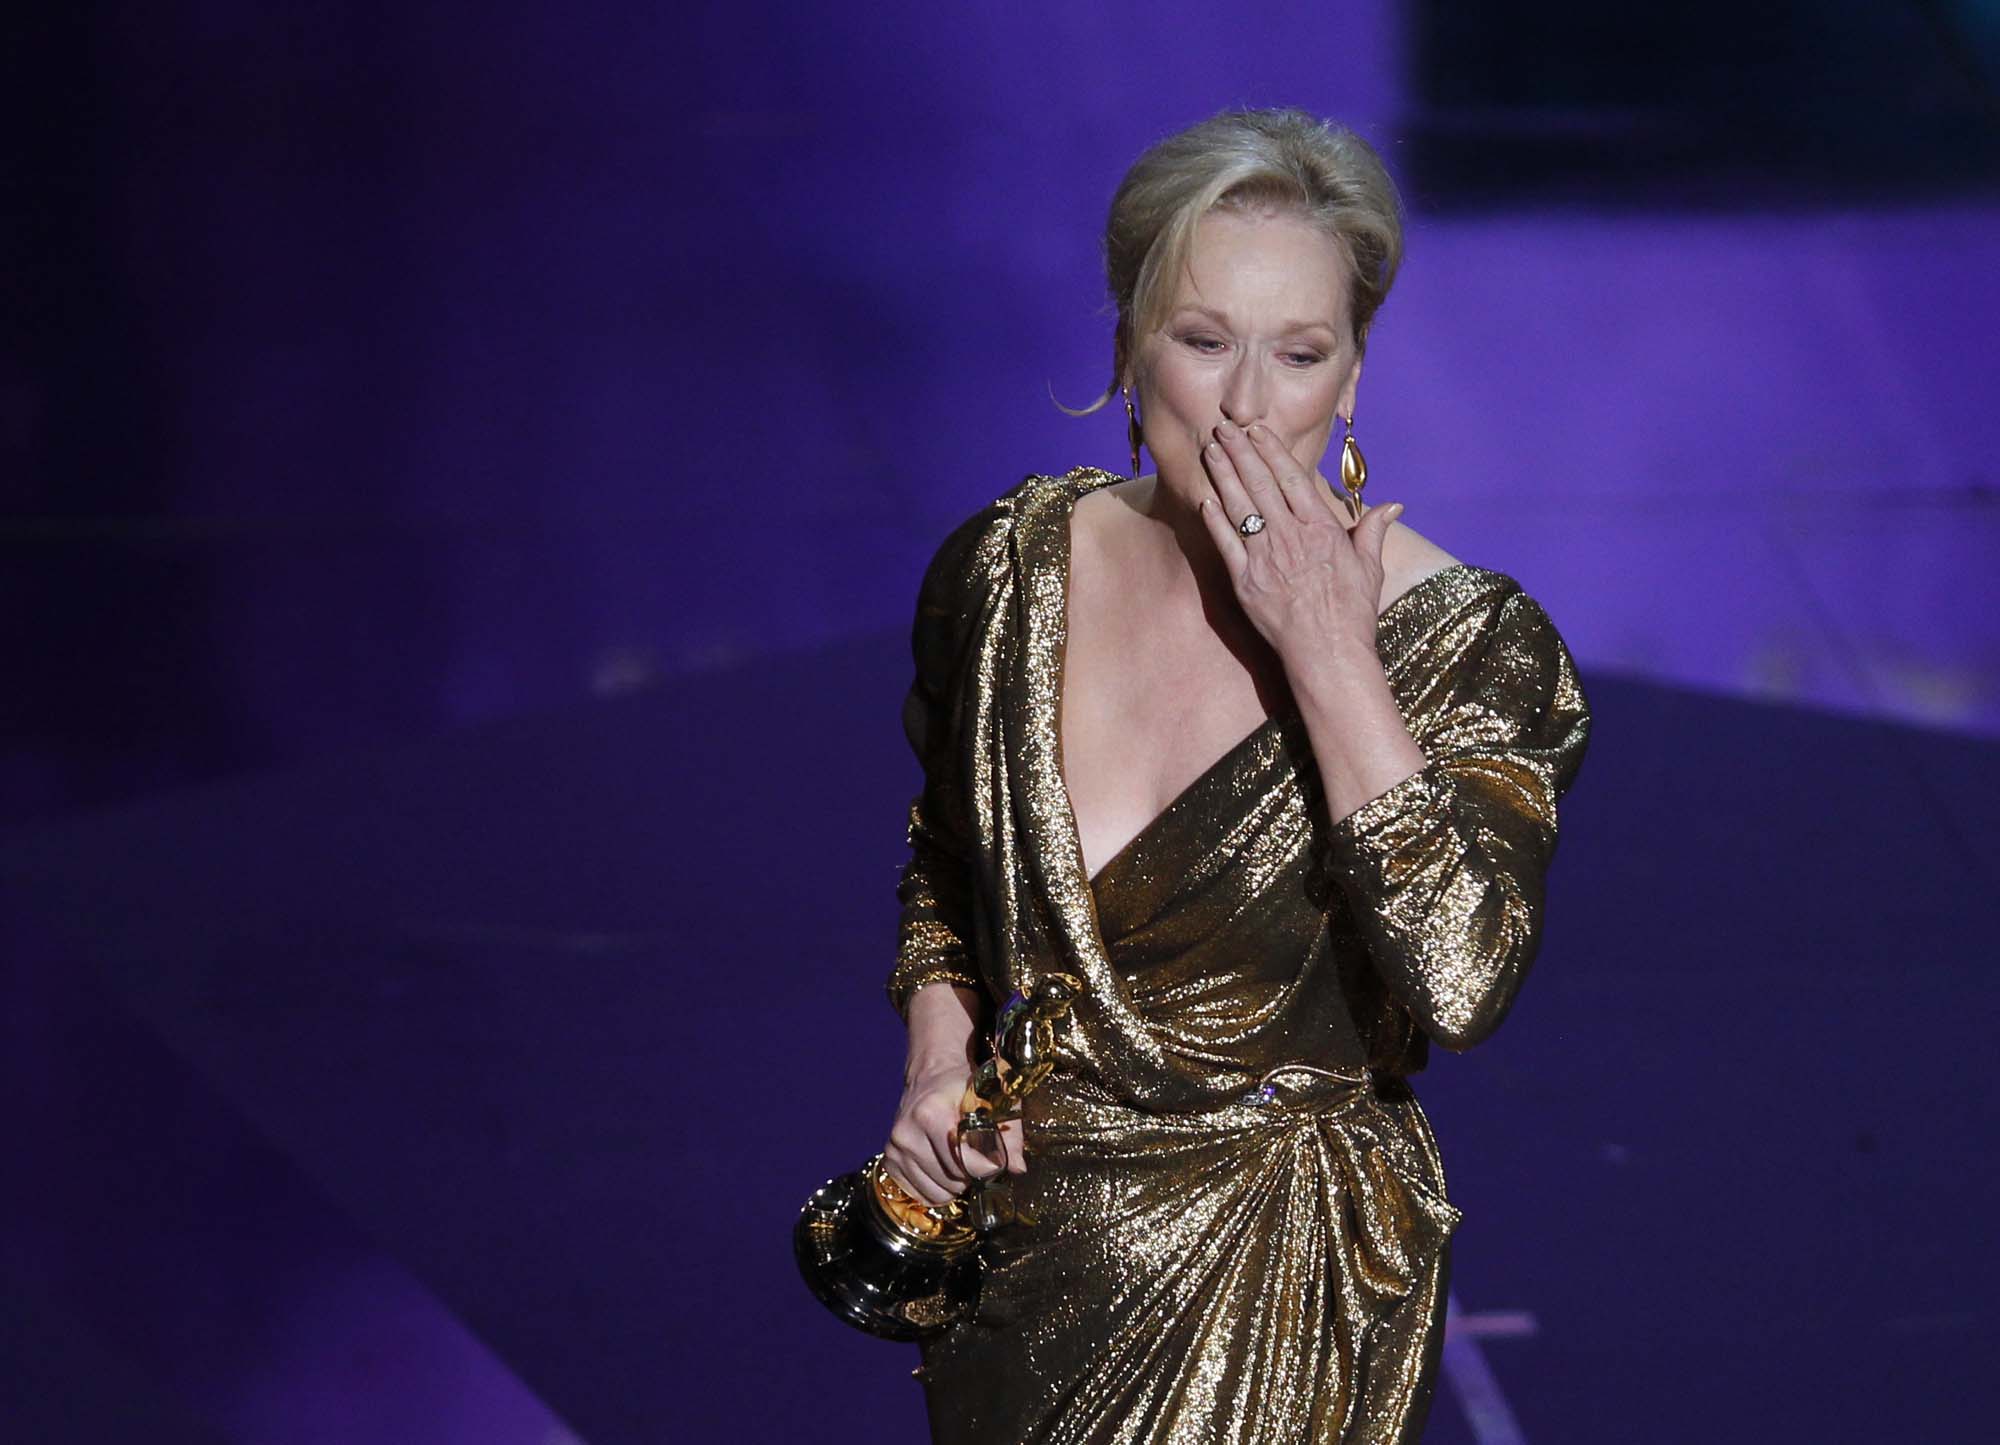 Meryl Streep wearing a gold dress with hand on her mouth